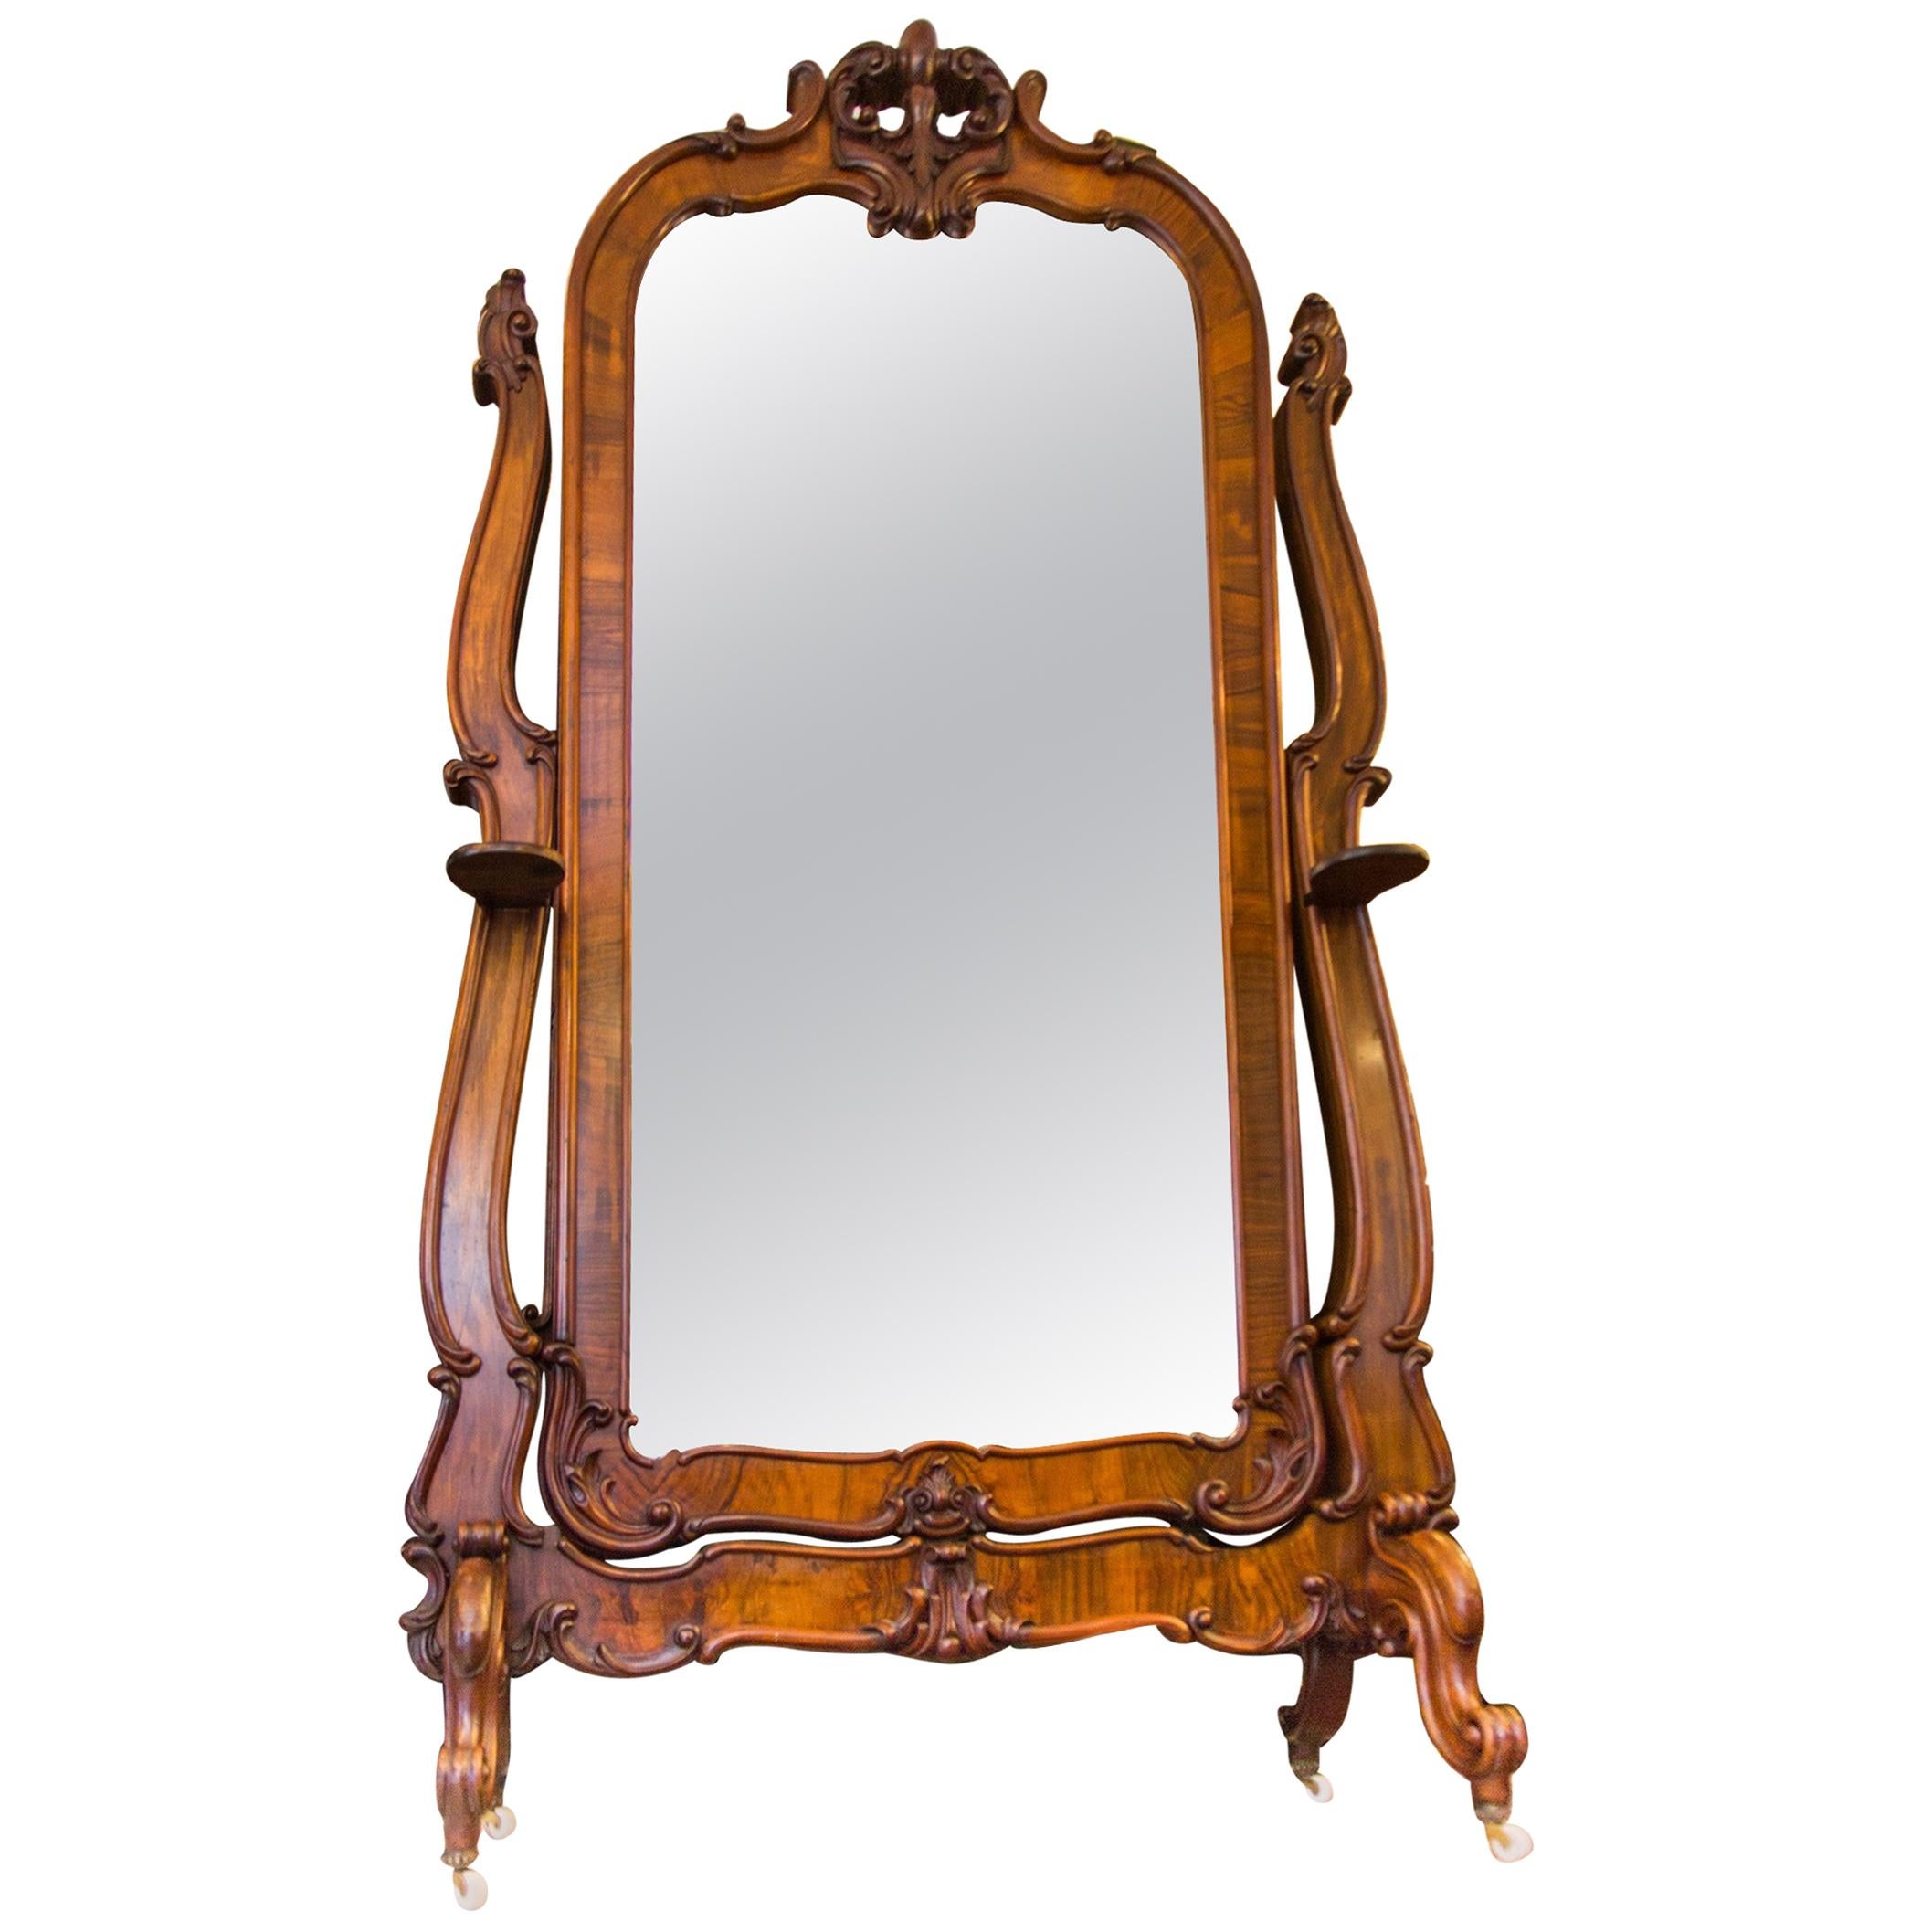 Large Rococo Style Full-Length Walnut Cheval Mirror, Late 19th Century For Sale